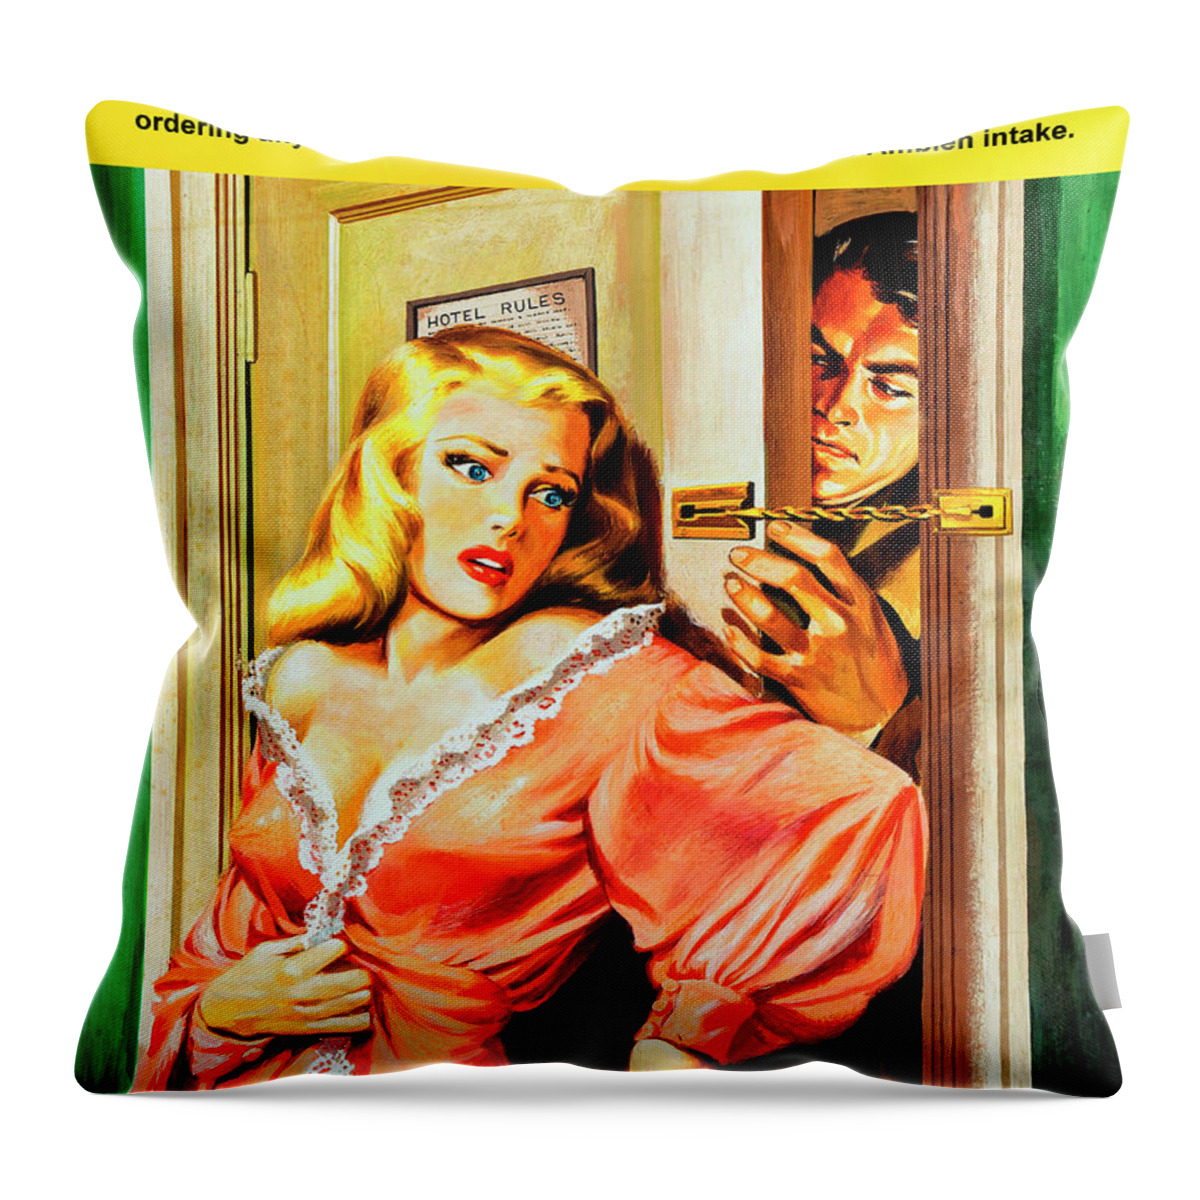 Pulp Fiction Throw Pillow featuring the mixed media Room Service by Dominic Piperata